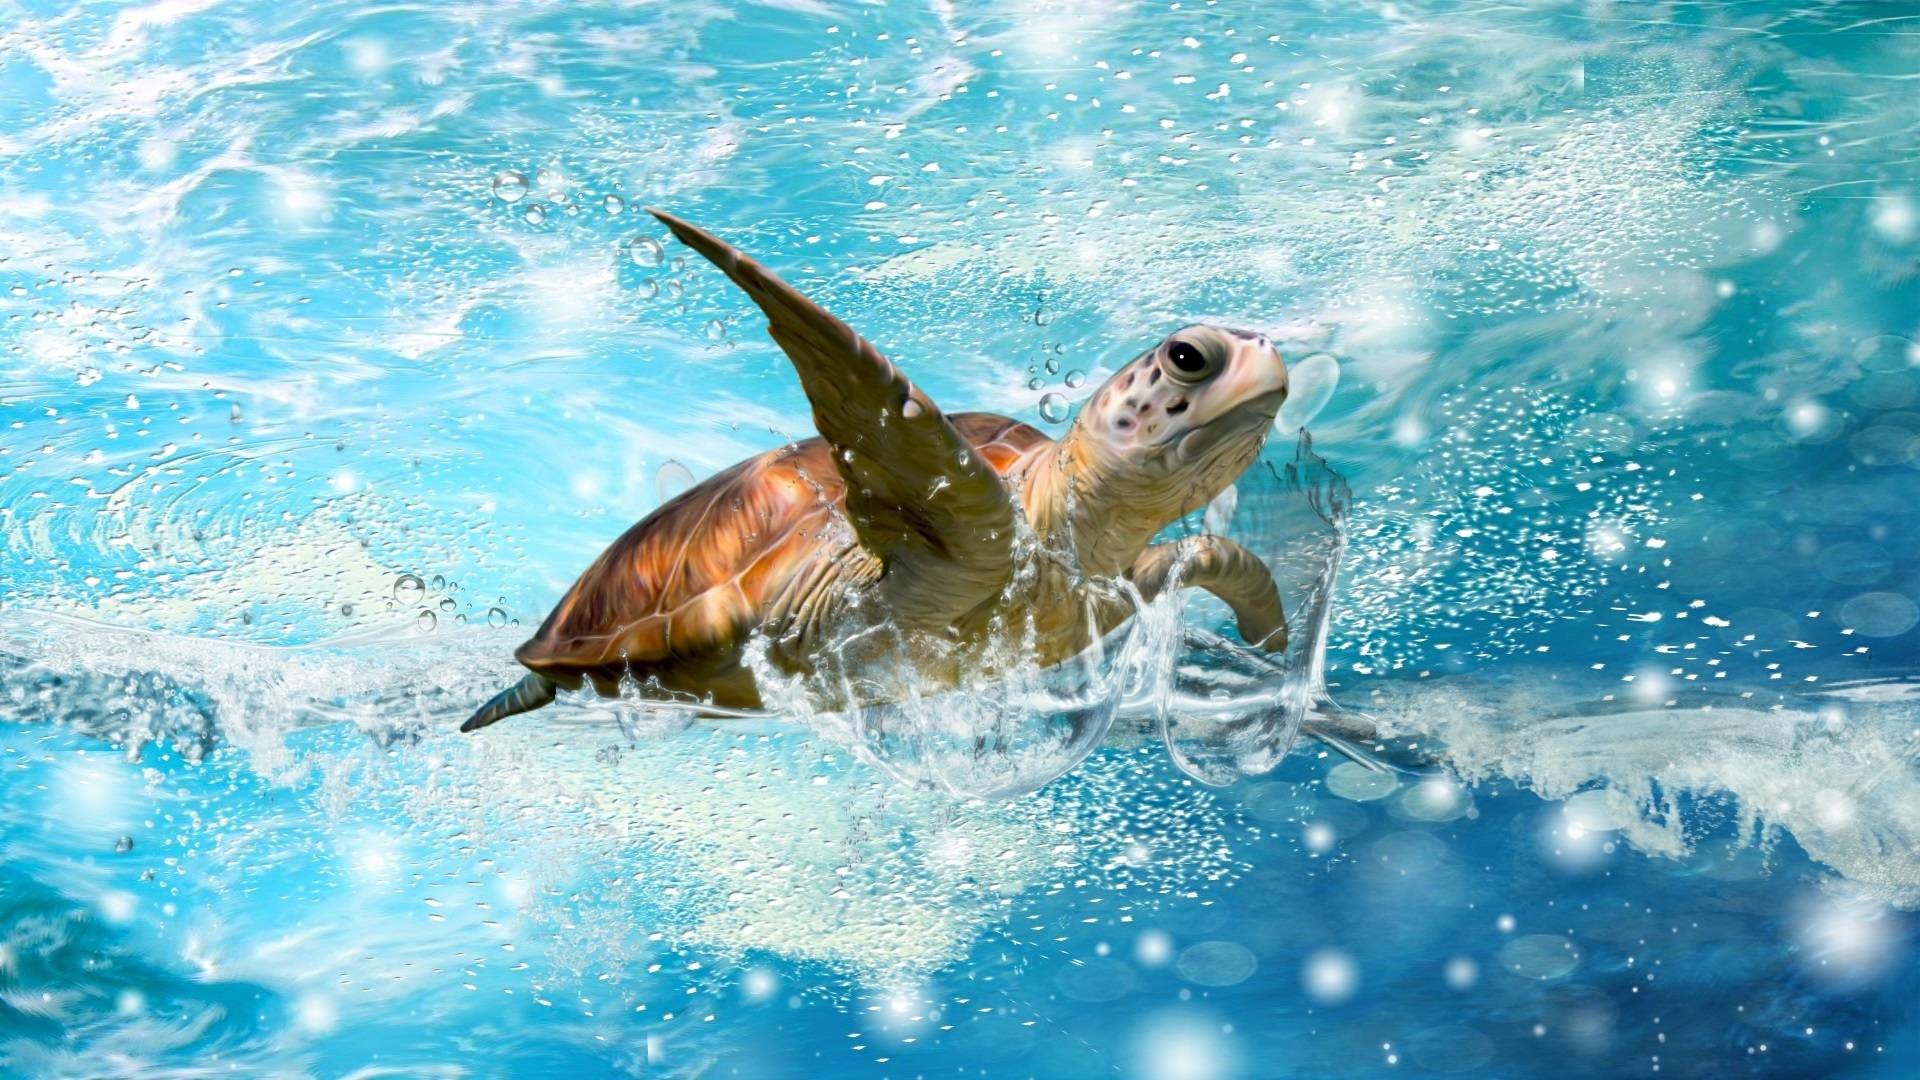 Turtle images